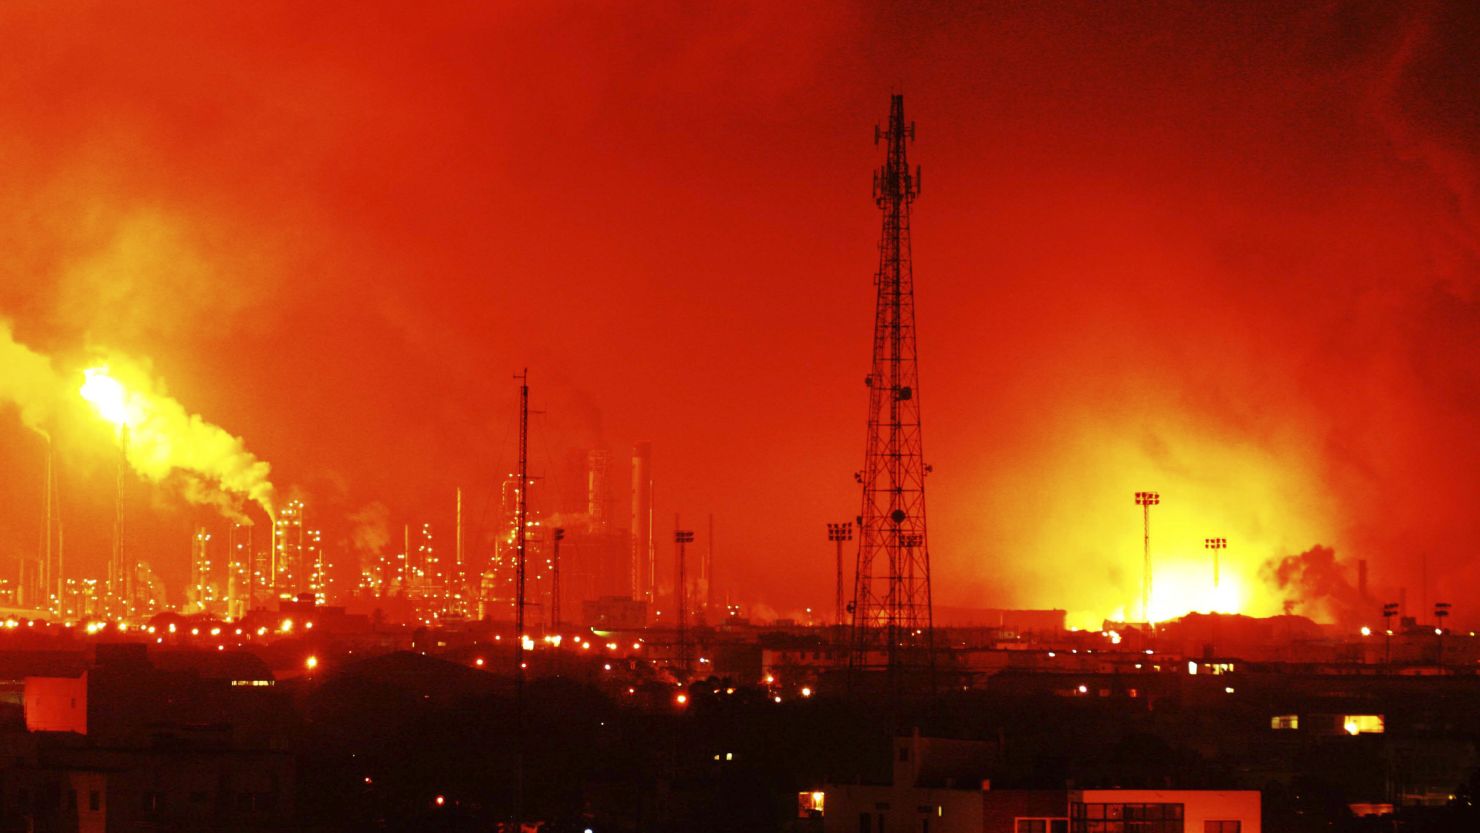 Fire glows at the site of an explosion at Amuay oil refinery in Punto Fijo, Venezuela, on Saturday.